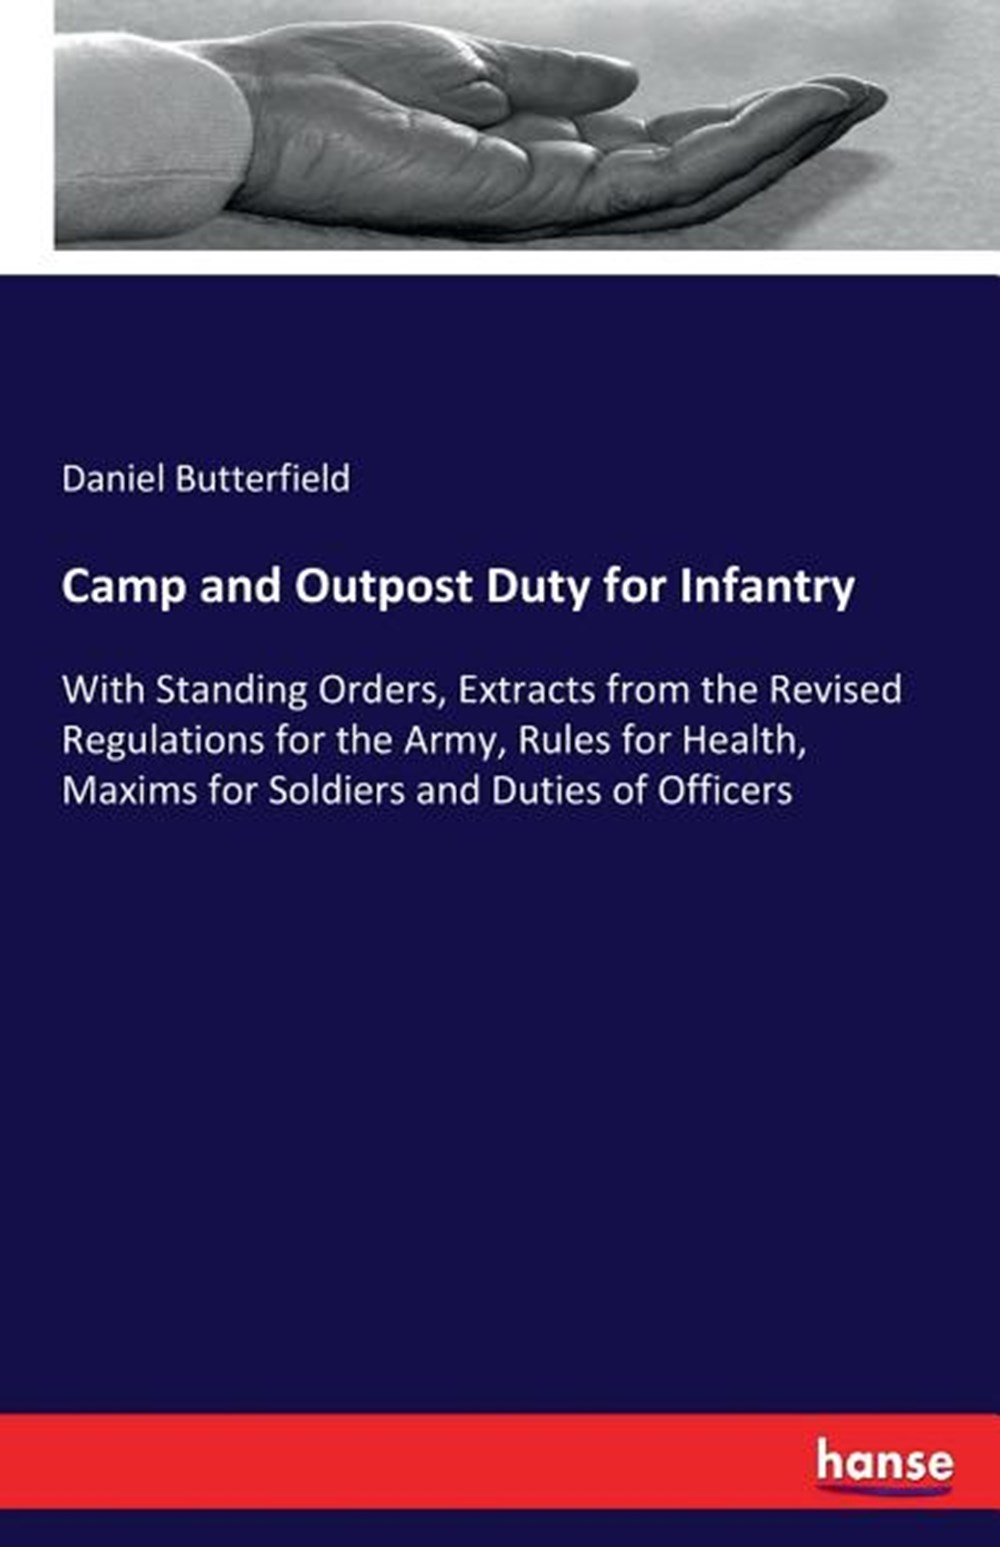 Camp and Outpost Duty for Infantry: With Standing Orders, Extracts from the Revised Regulations for 